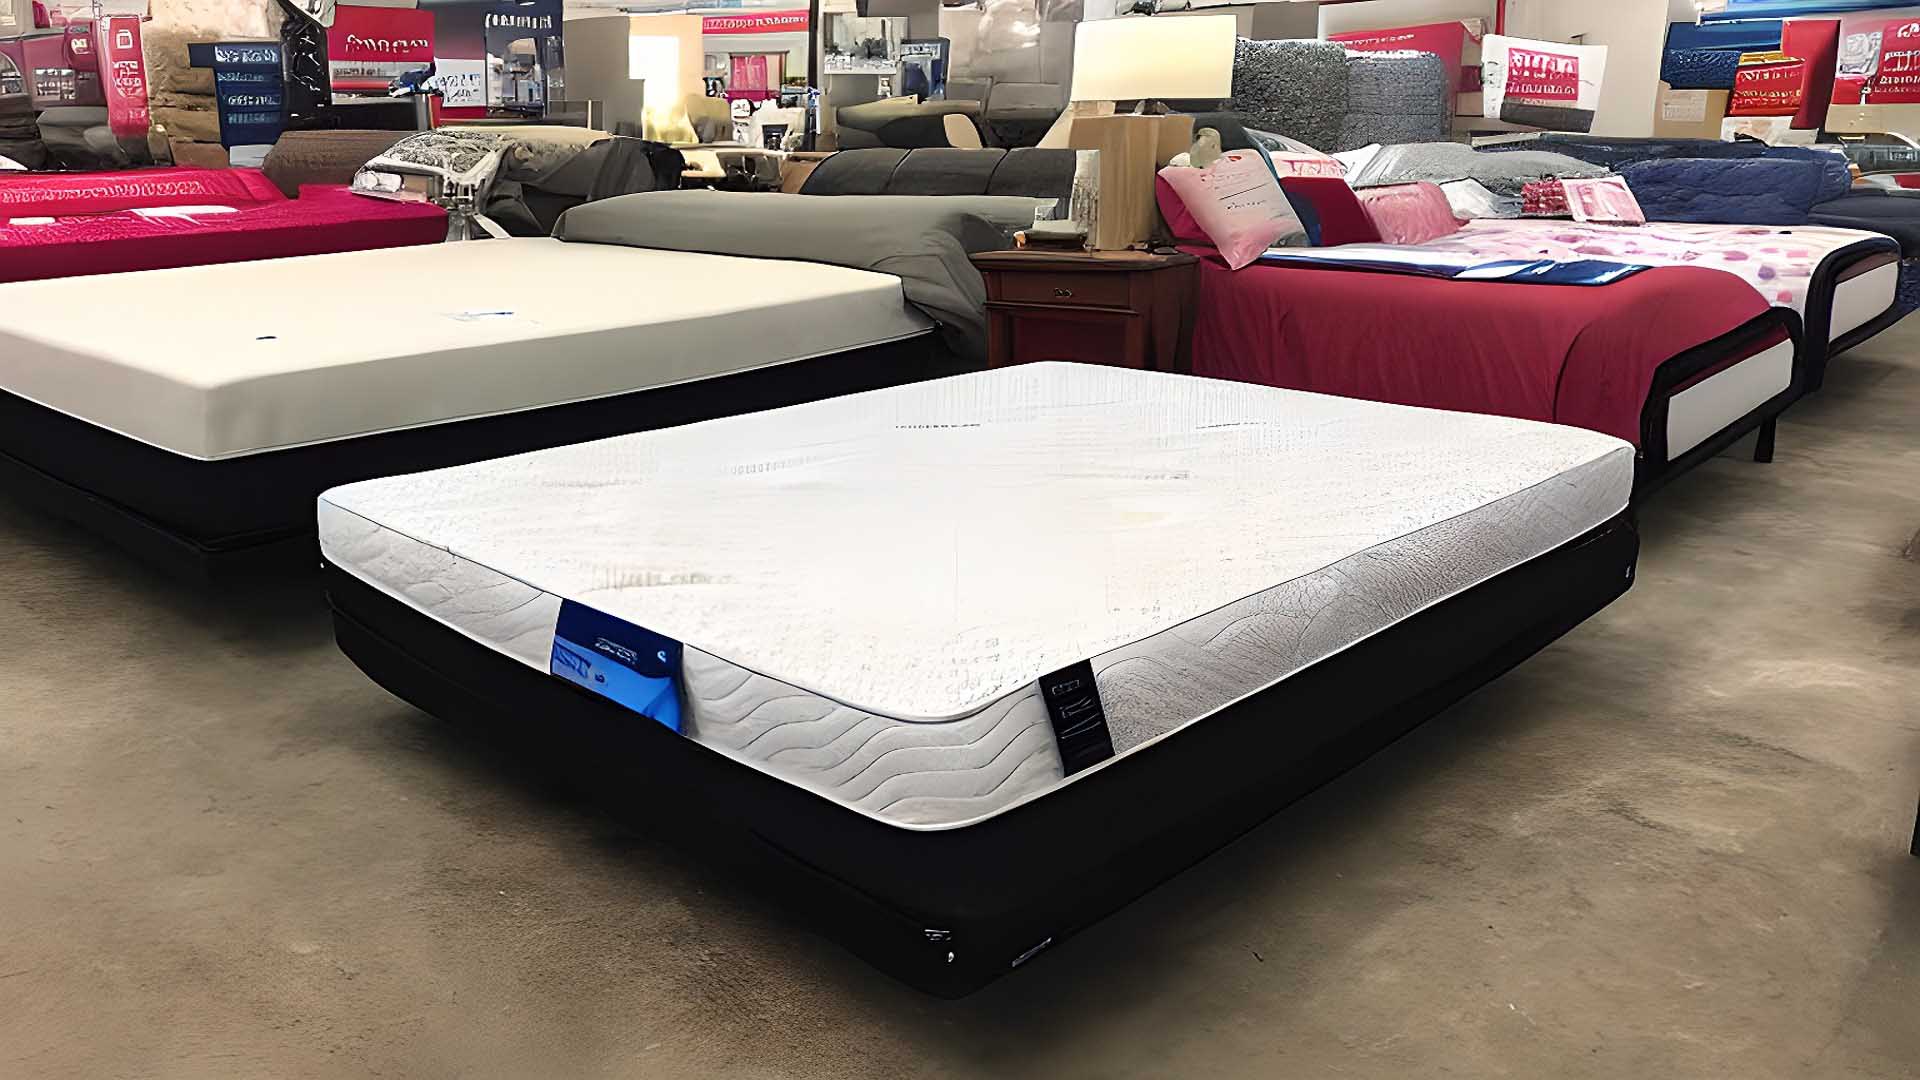 Mattress Sales & Deals in New Rochelle, NY